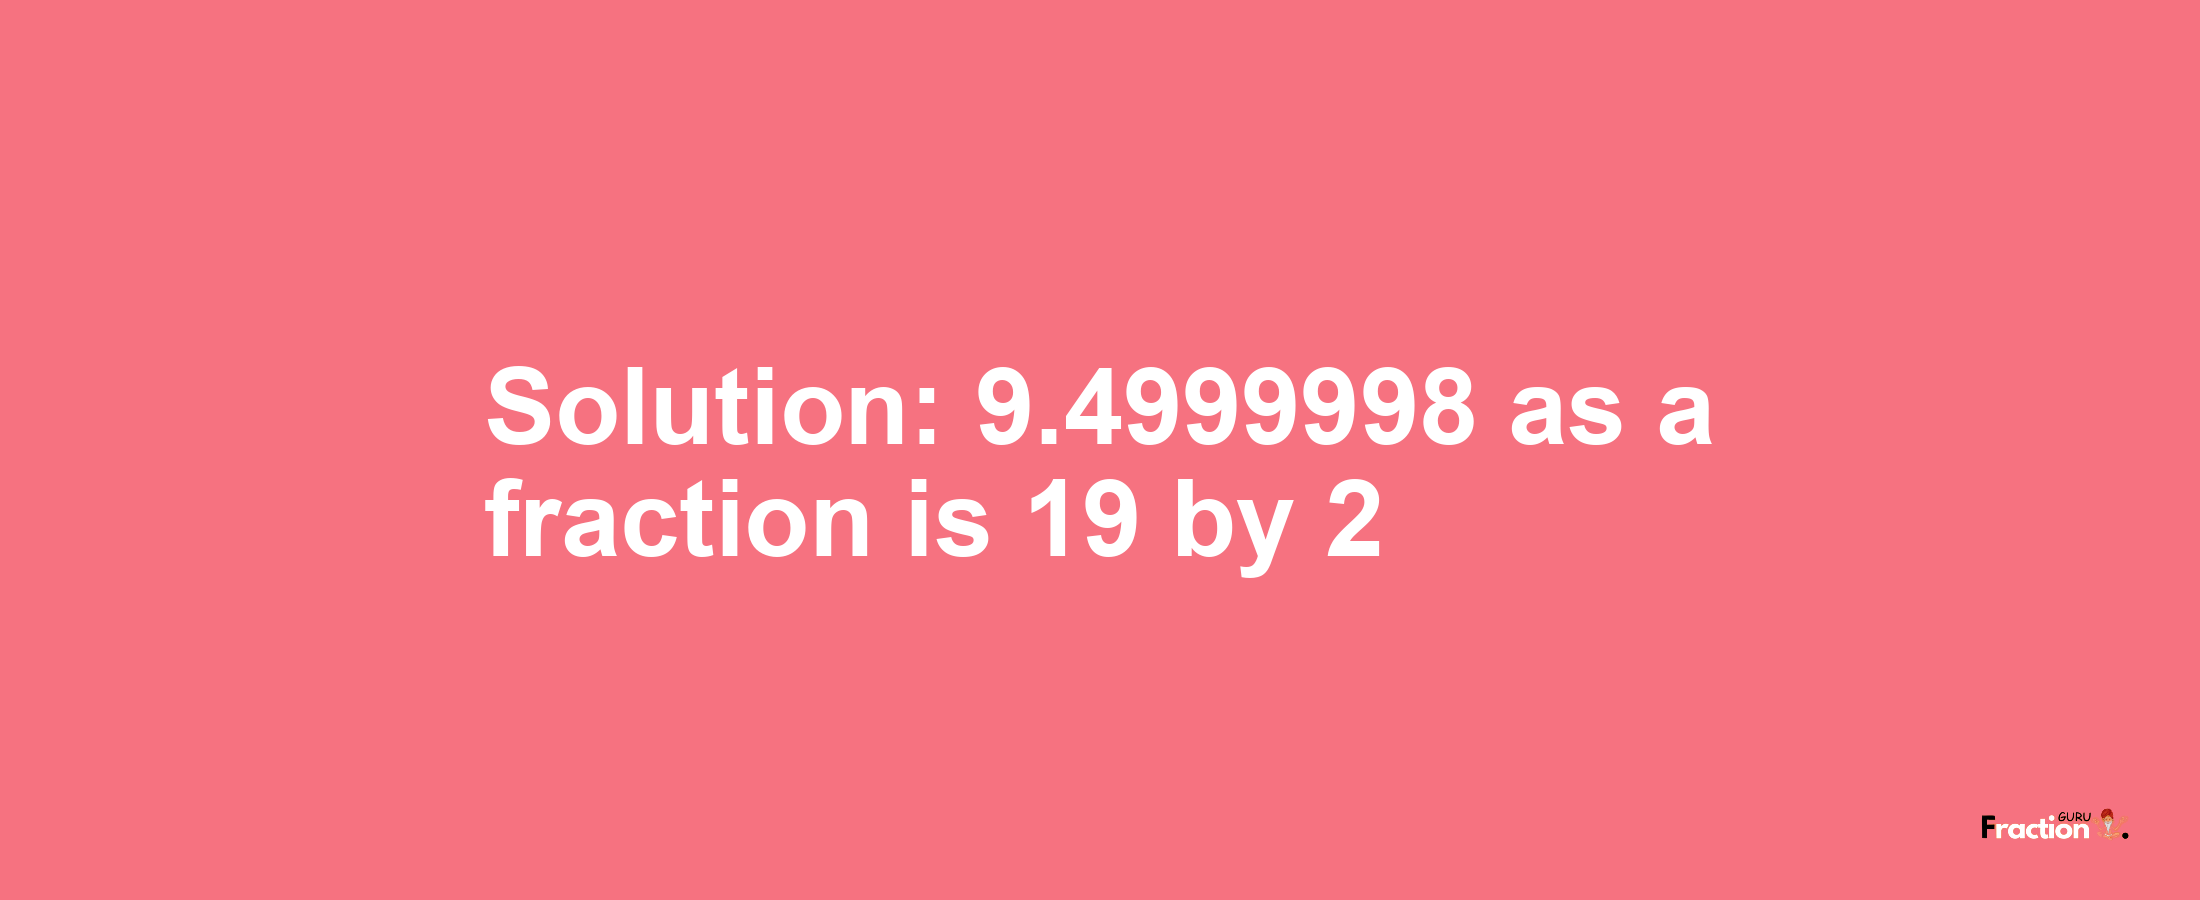 Solution:9.4999998 as a fraction is 19/2